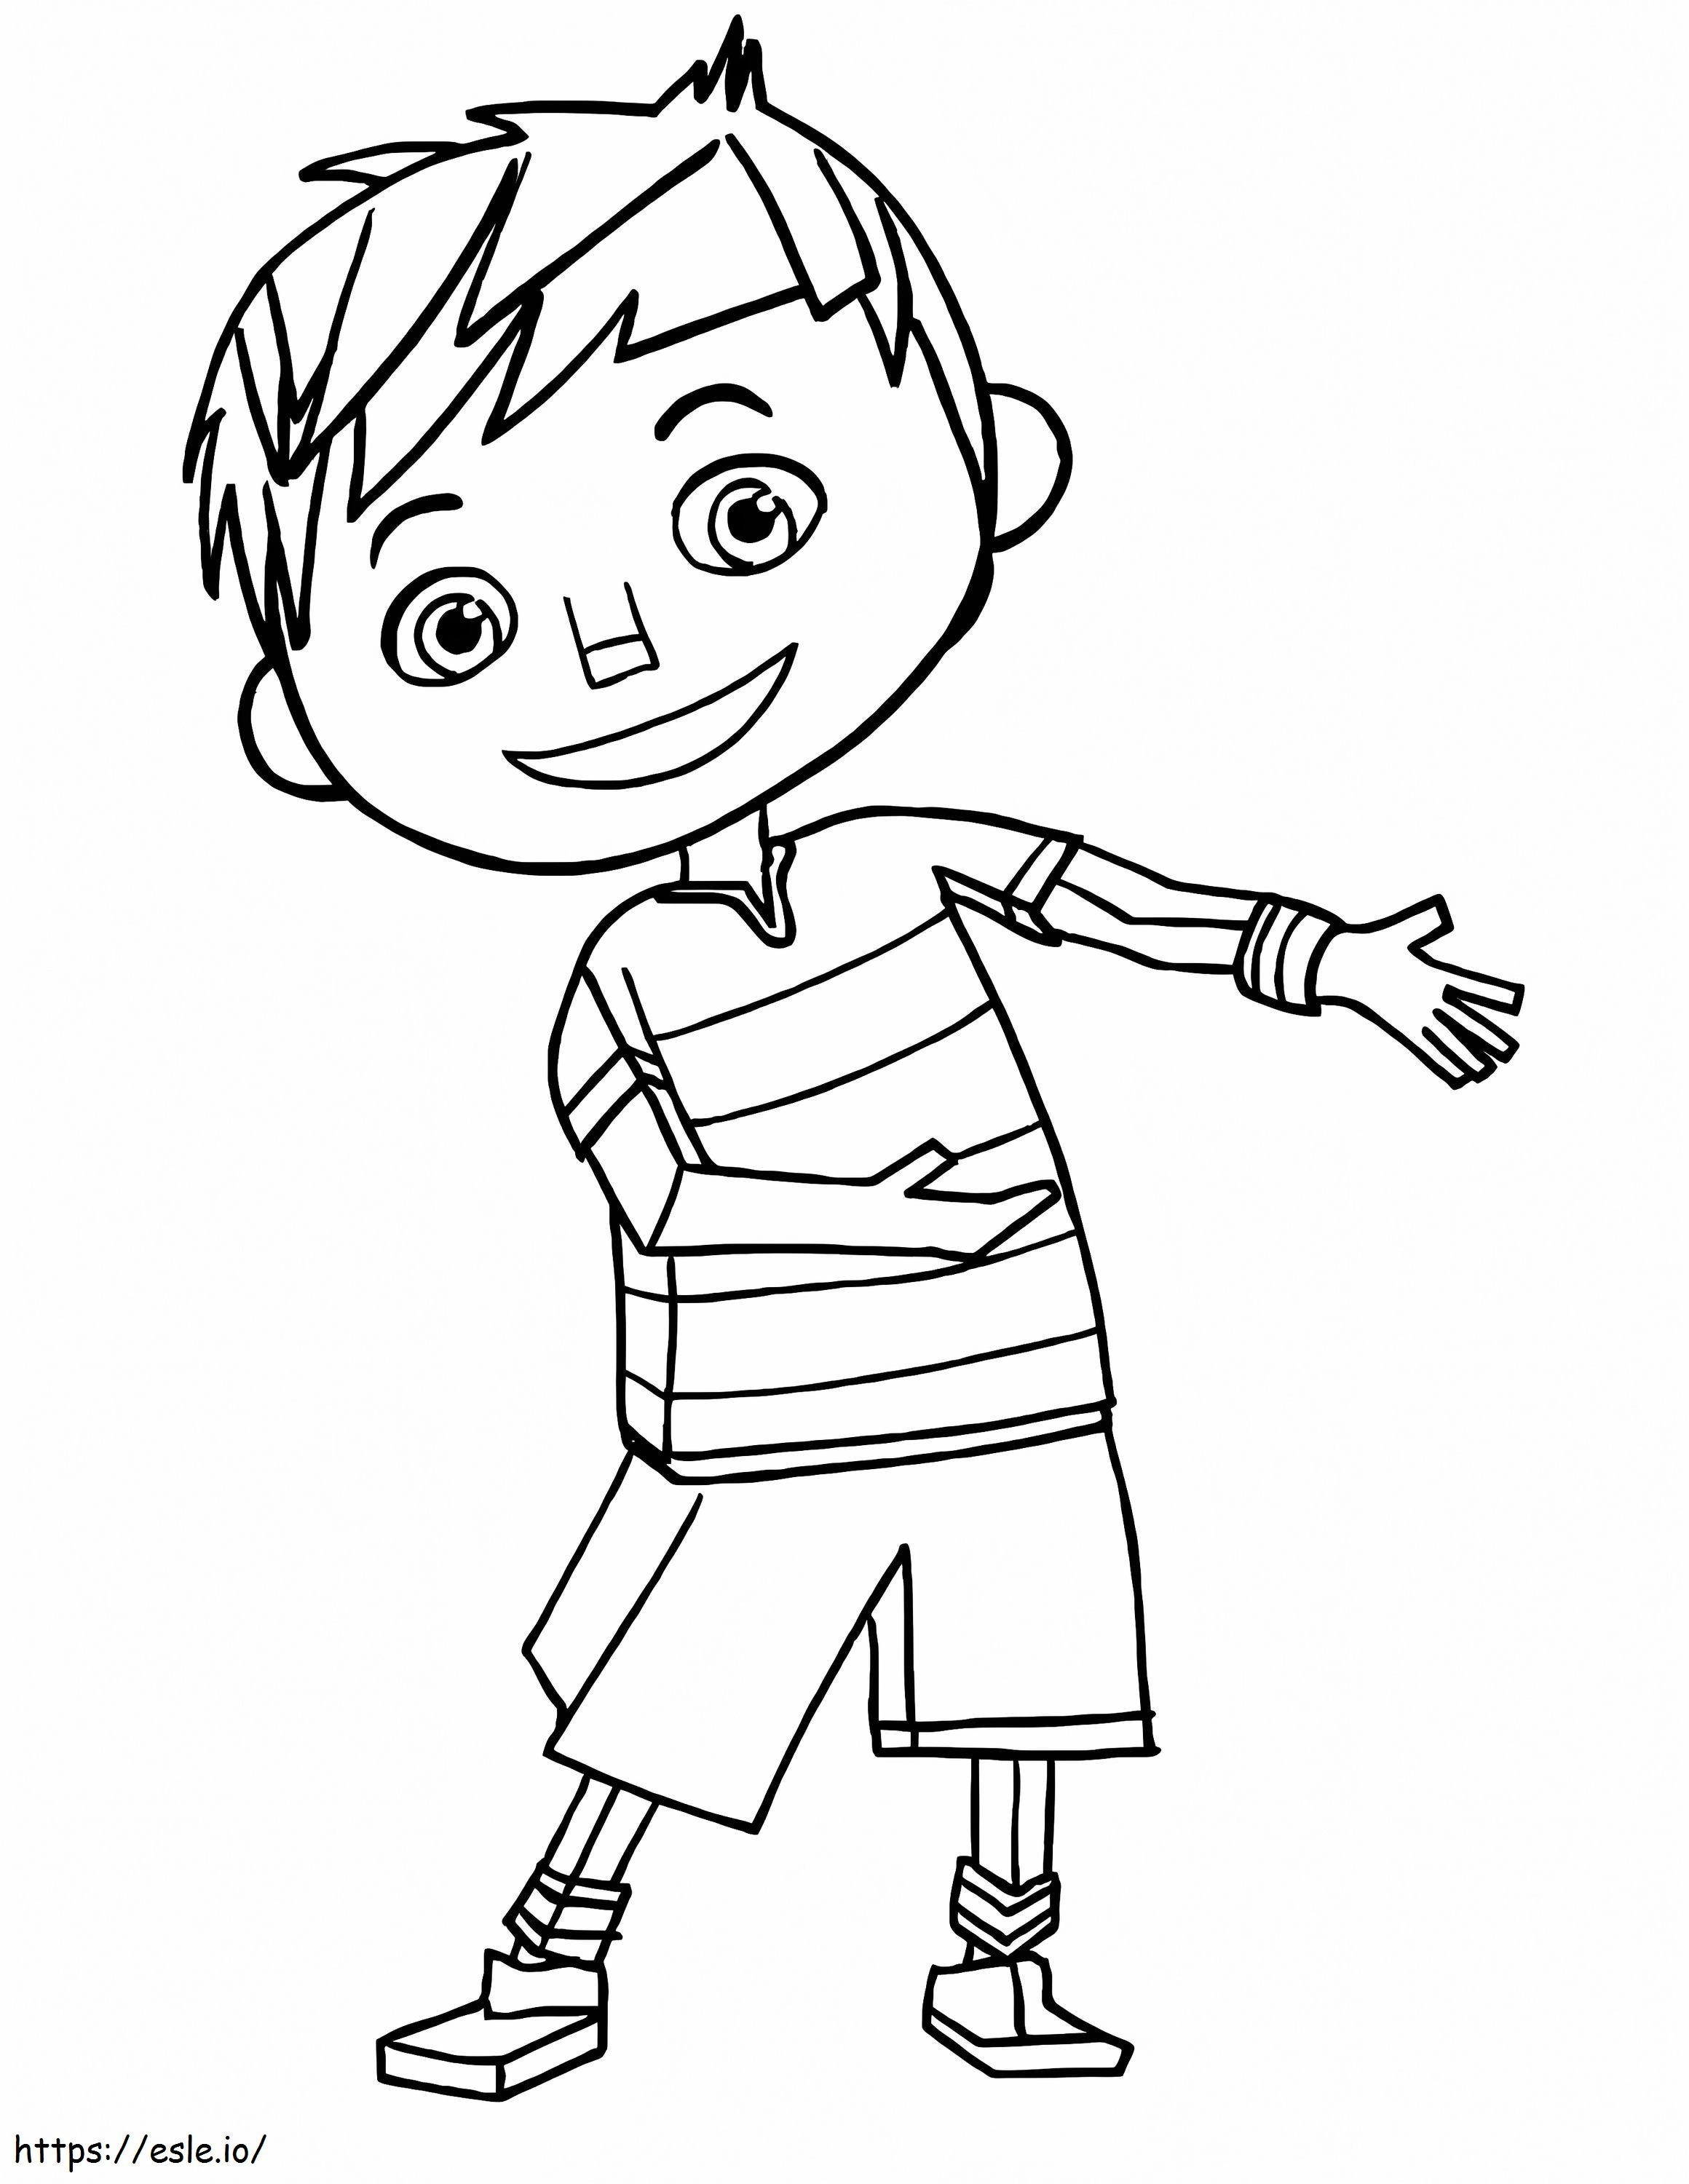 Zack In Zack And Quack coloring page